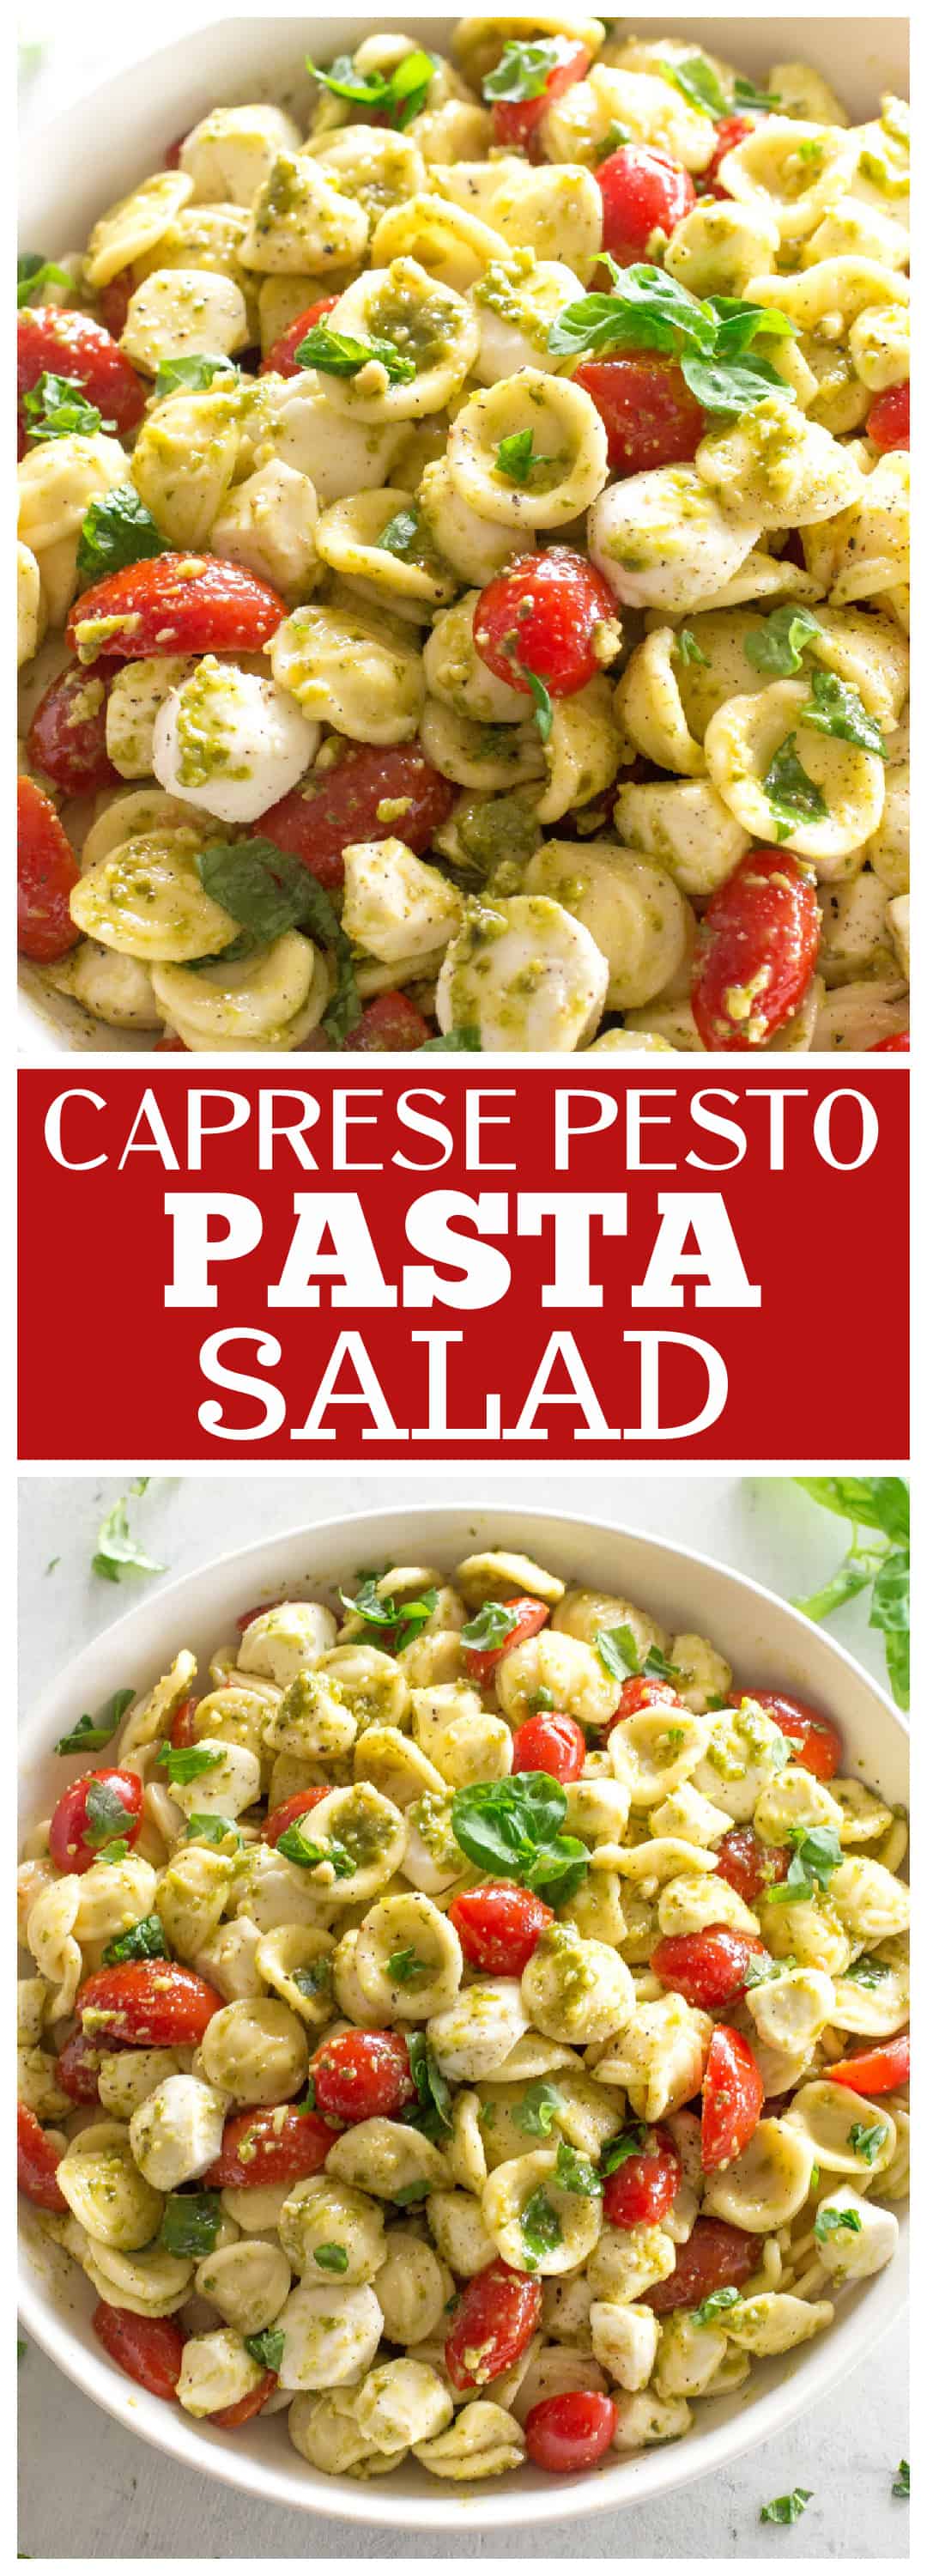 Caprese Pasta Salad | The Girl Who Ate Everything